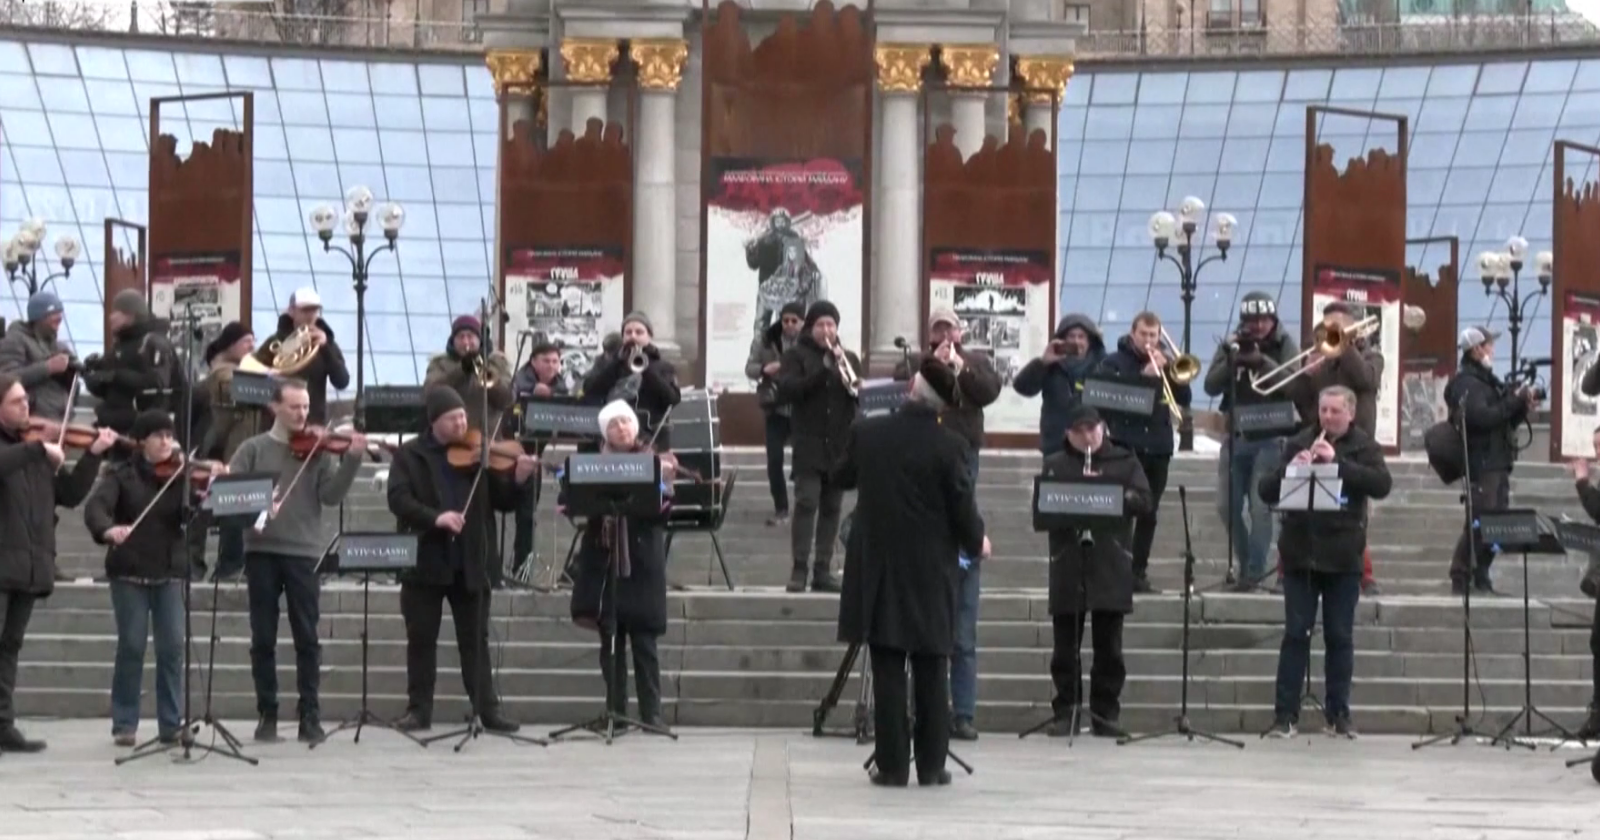 VIDEO.  In the midst of the war, the Kyiv Classical Orchestra plays "for peace" in Maidan Square